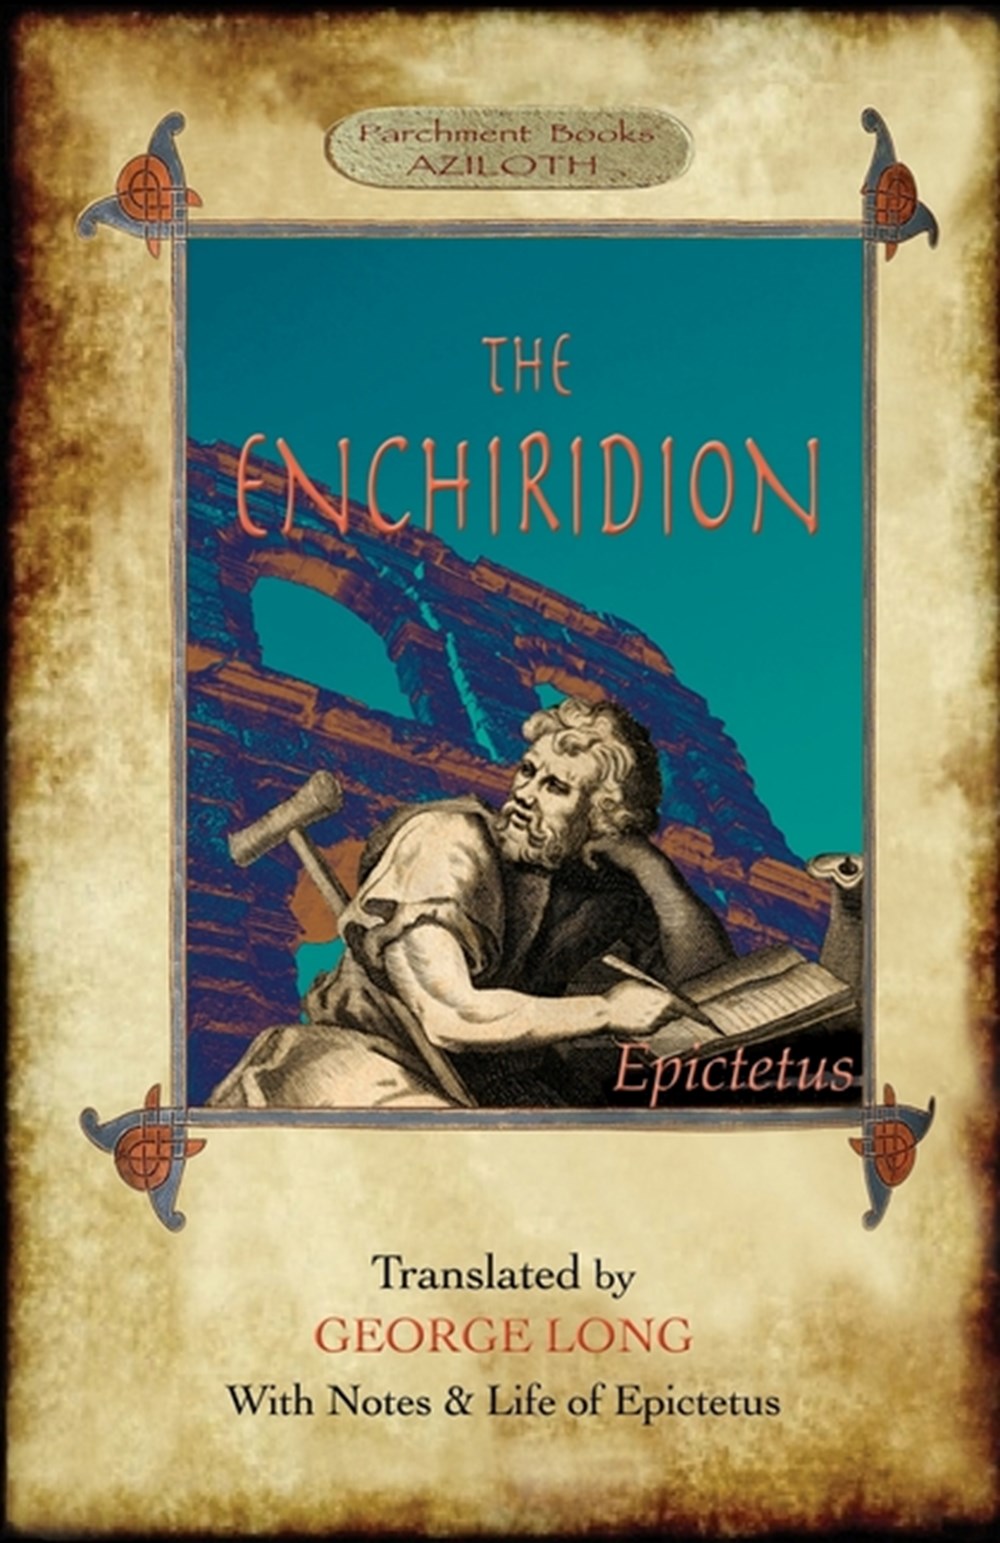 Enchiridion: Translated by George Long with Notes and a Life of Epictetus (Aziloth Books).